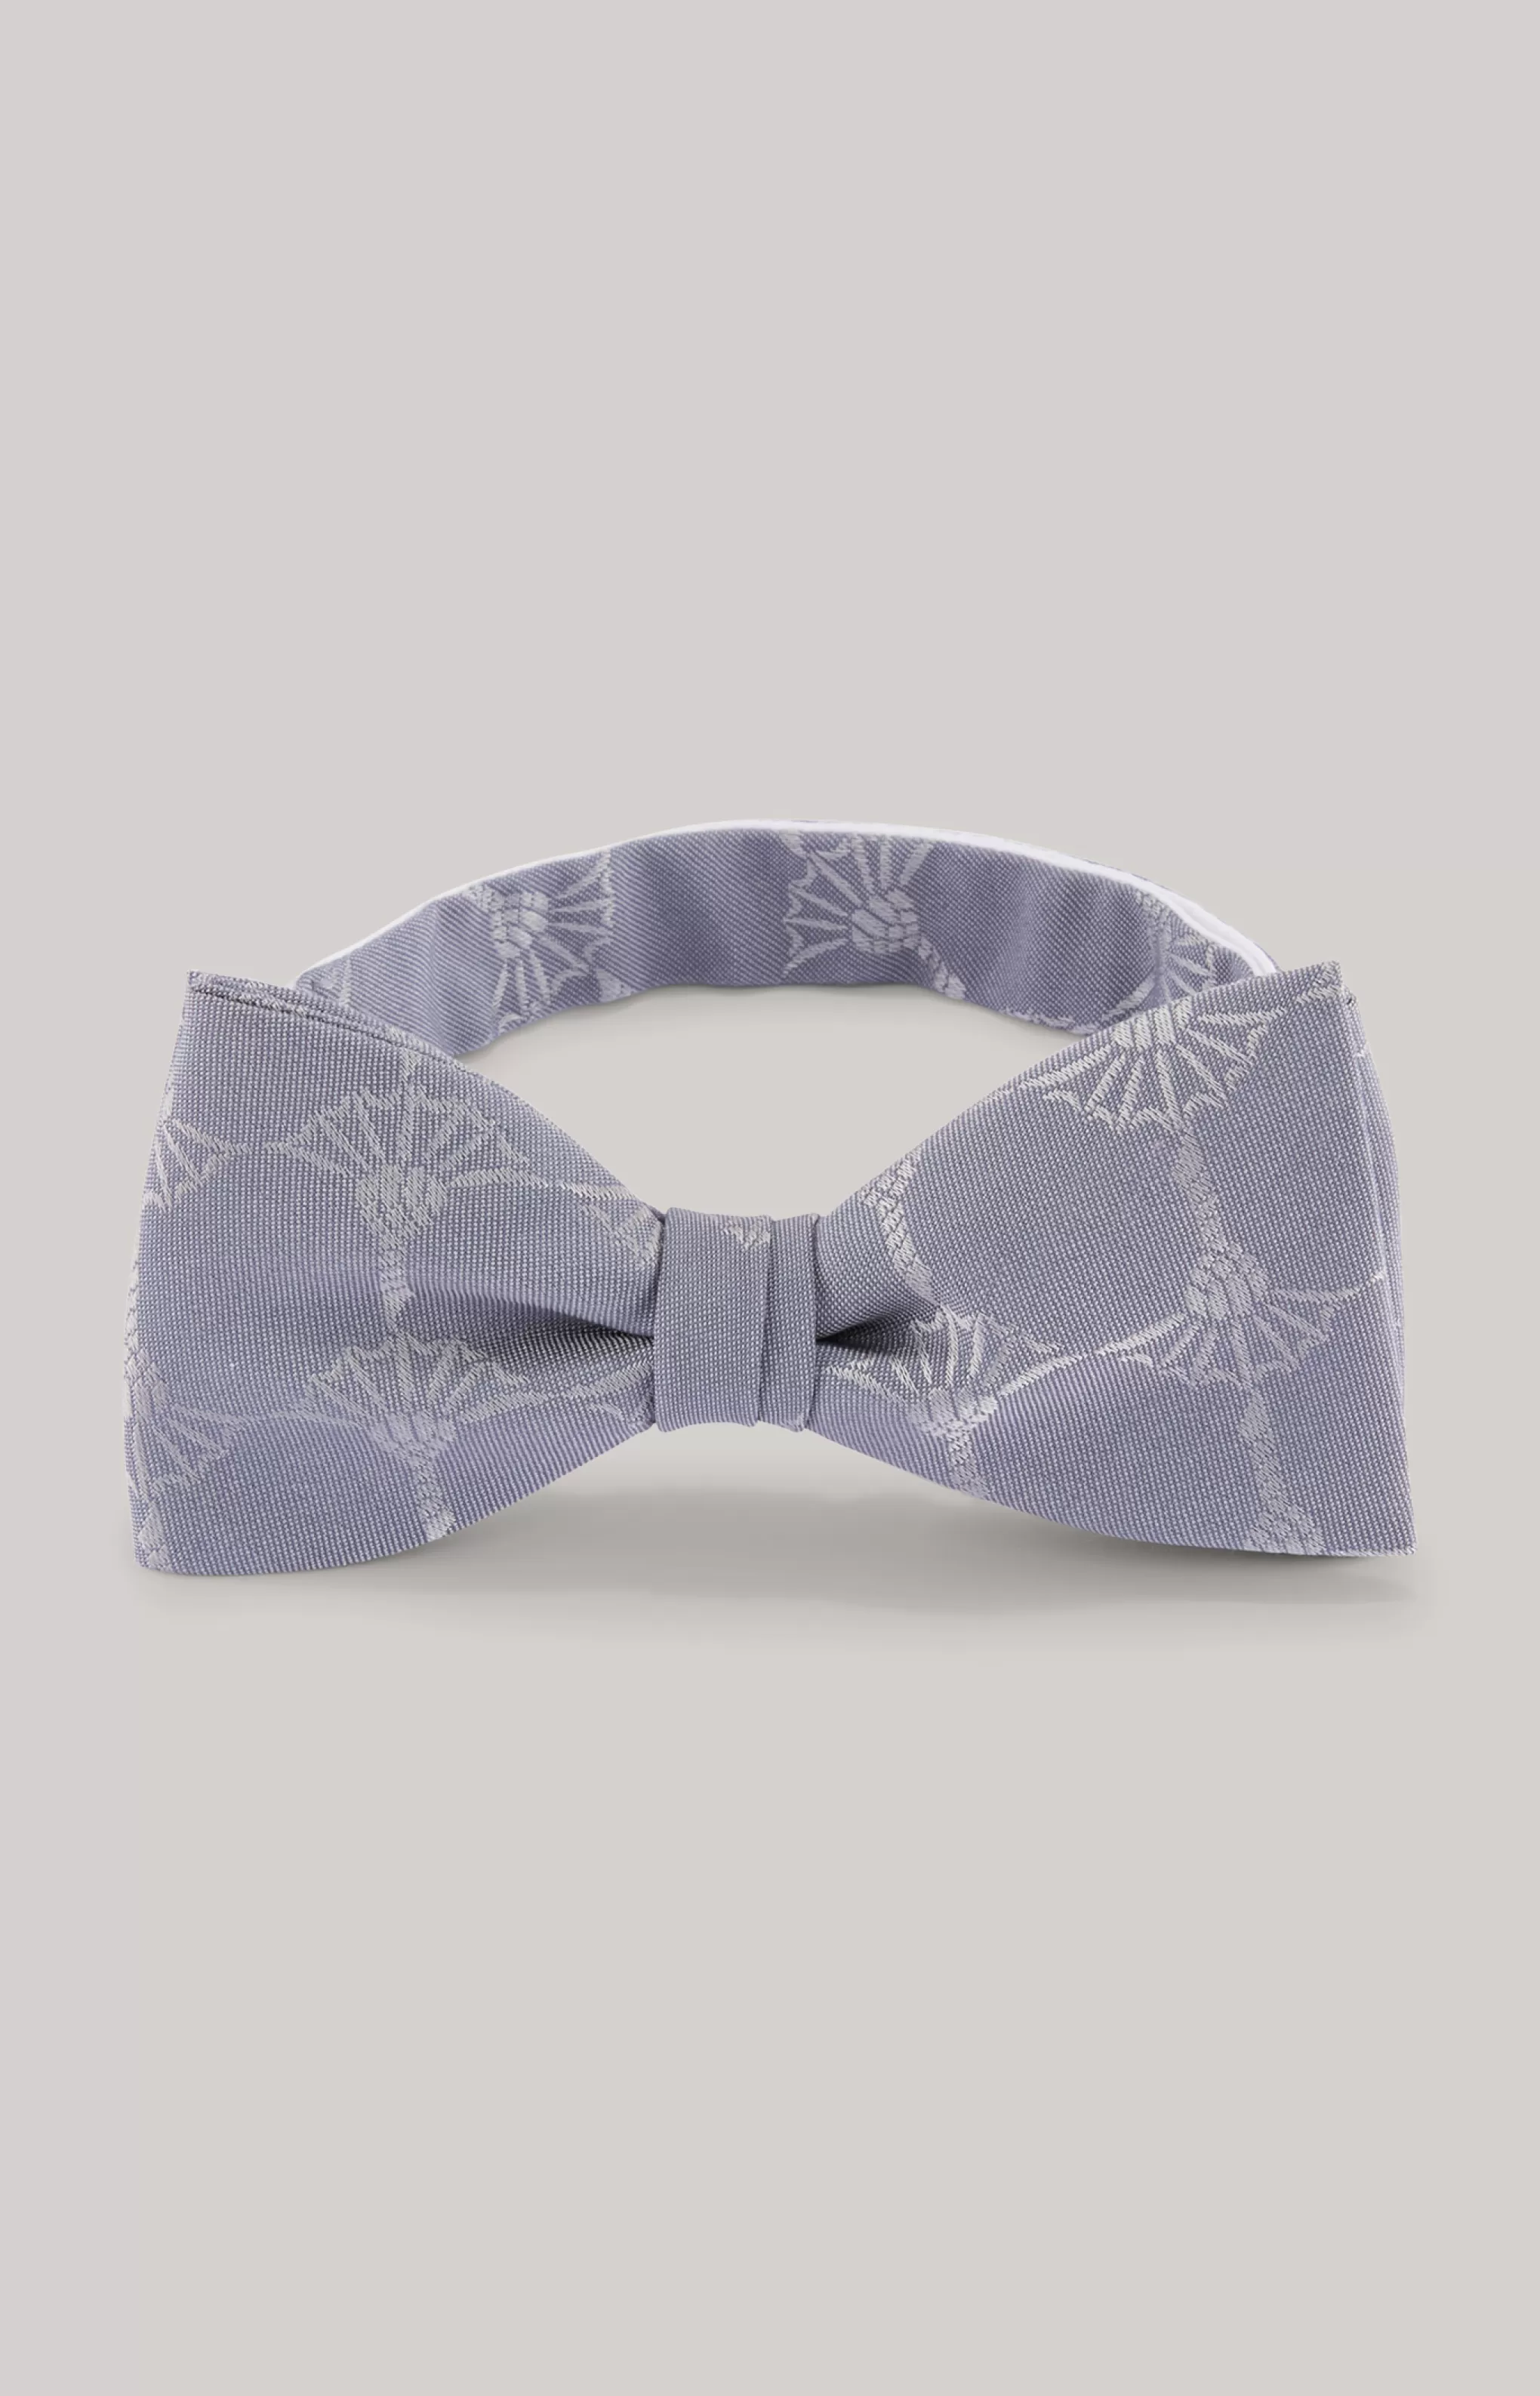 Ties & Bow Ties*JOOP Ties & Bow Ties Bow tie in blue and grey